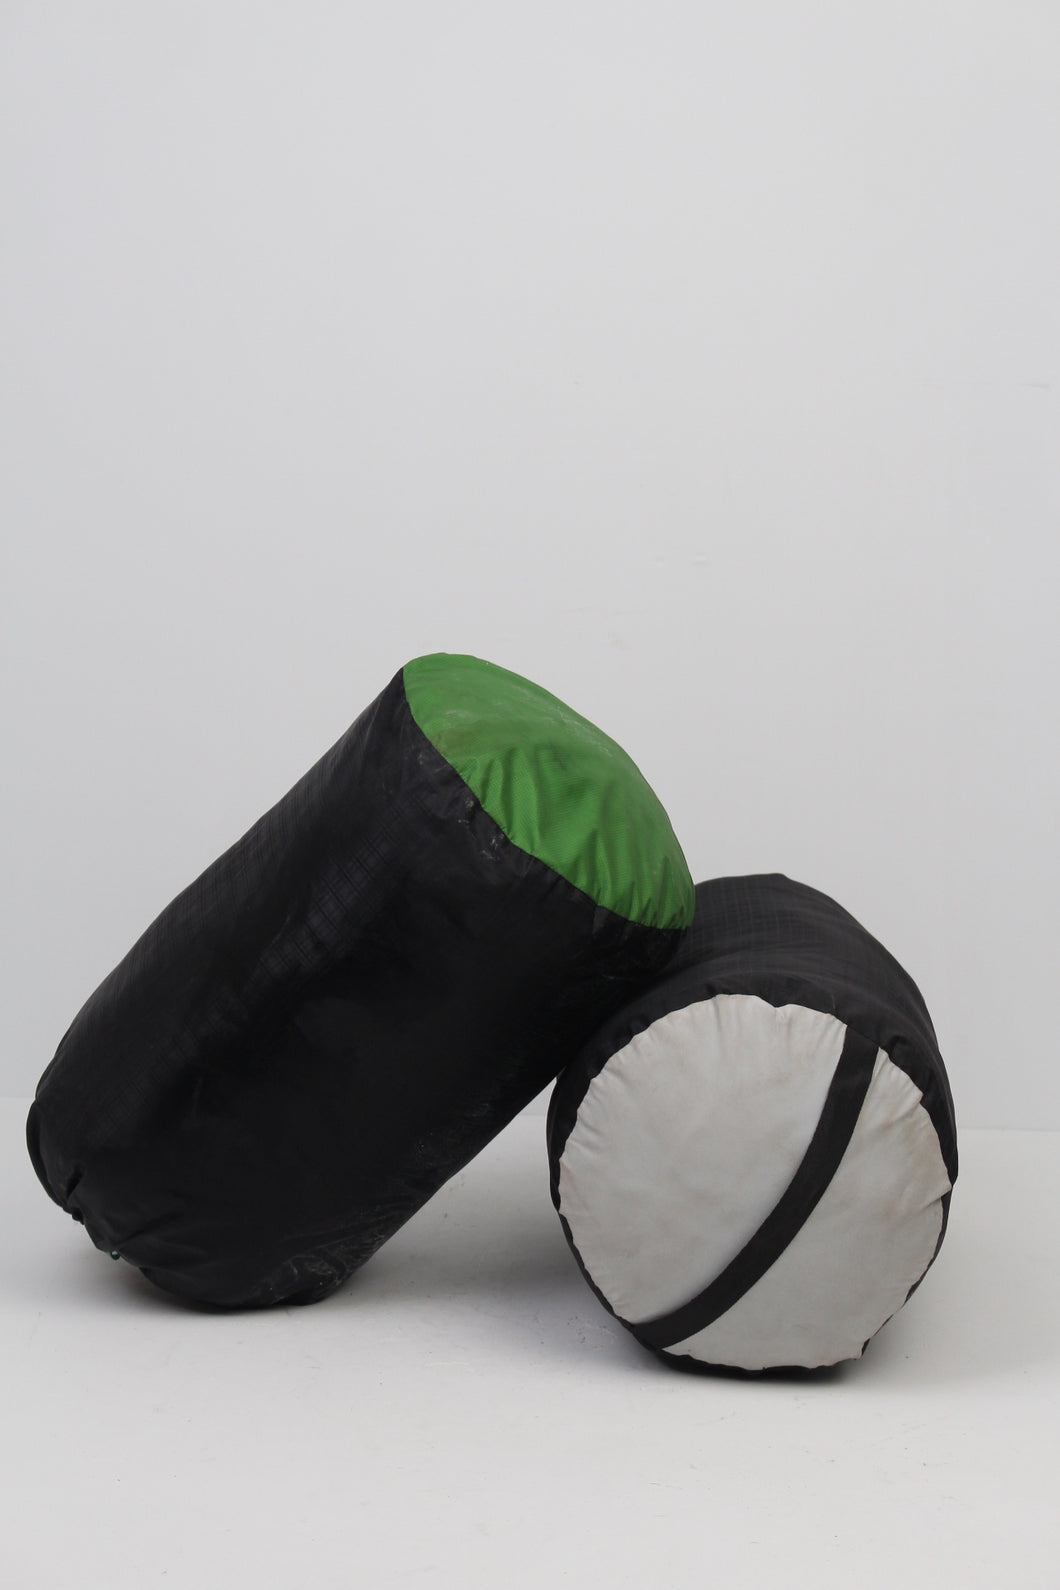 Set of 3 Black, White & green Sleeping Bags - GS Productions